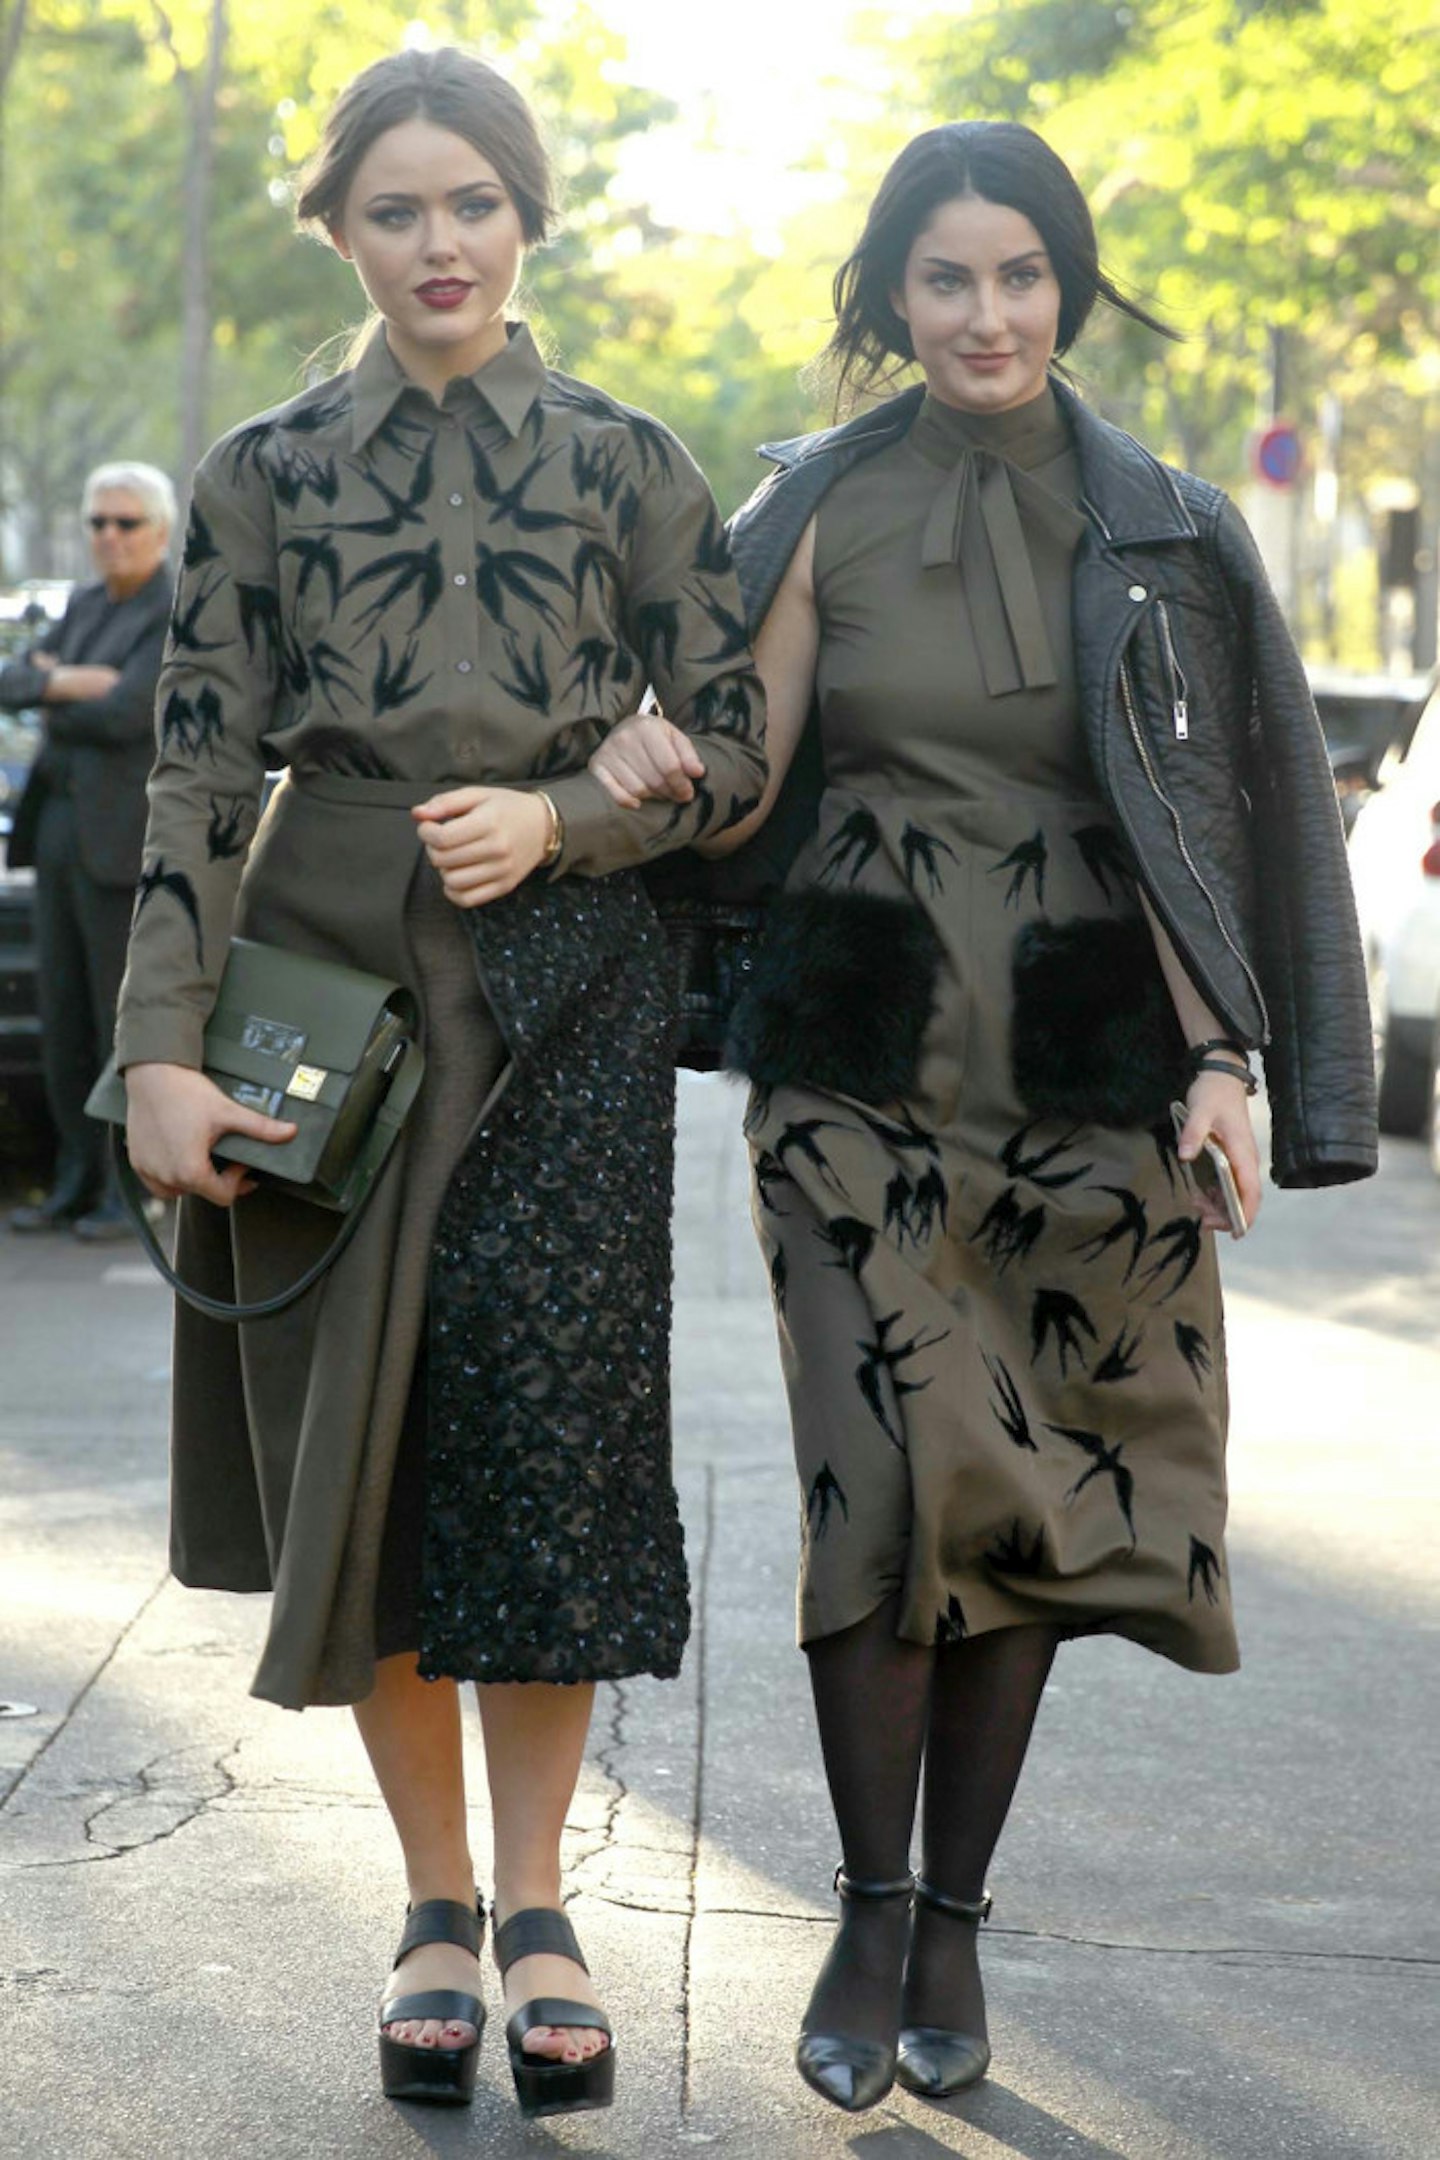 MetroStyleWatch: How To Match Outfits With A Friend, According To